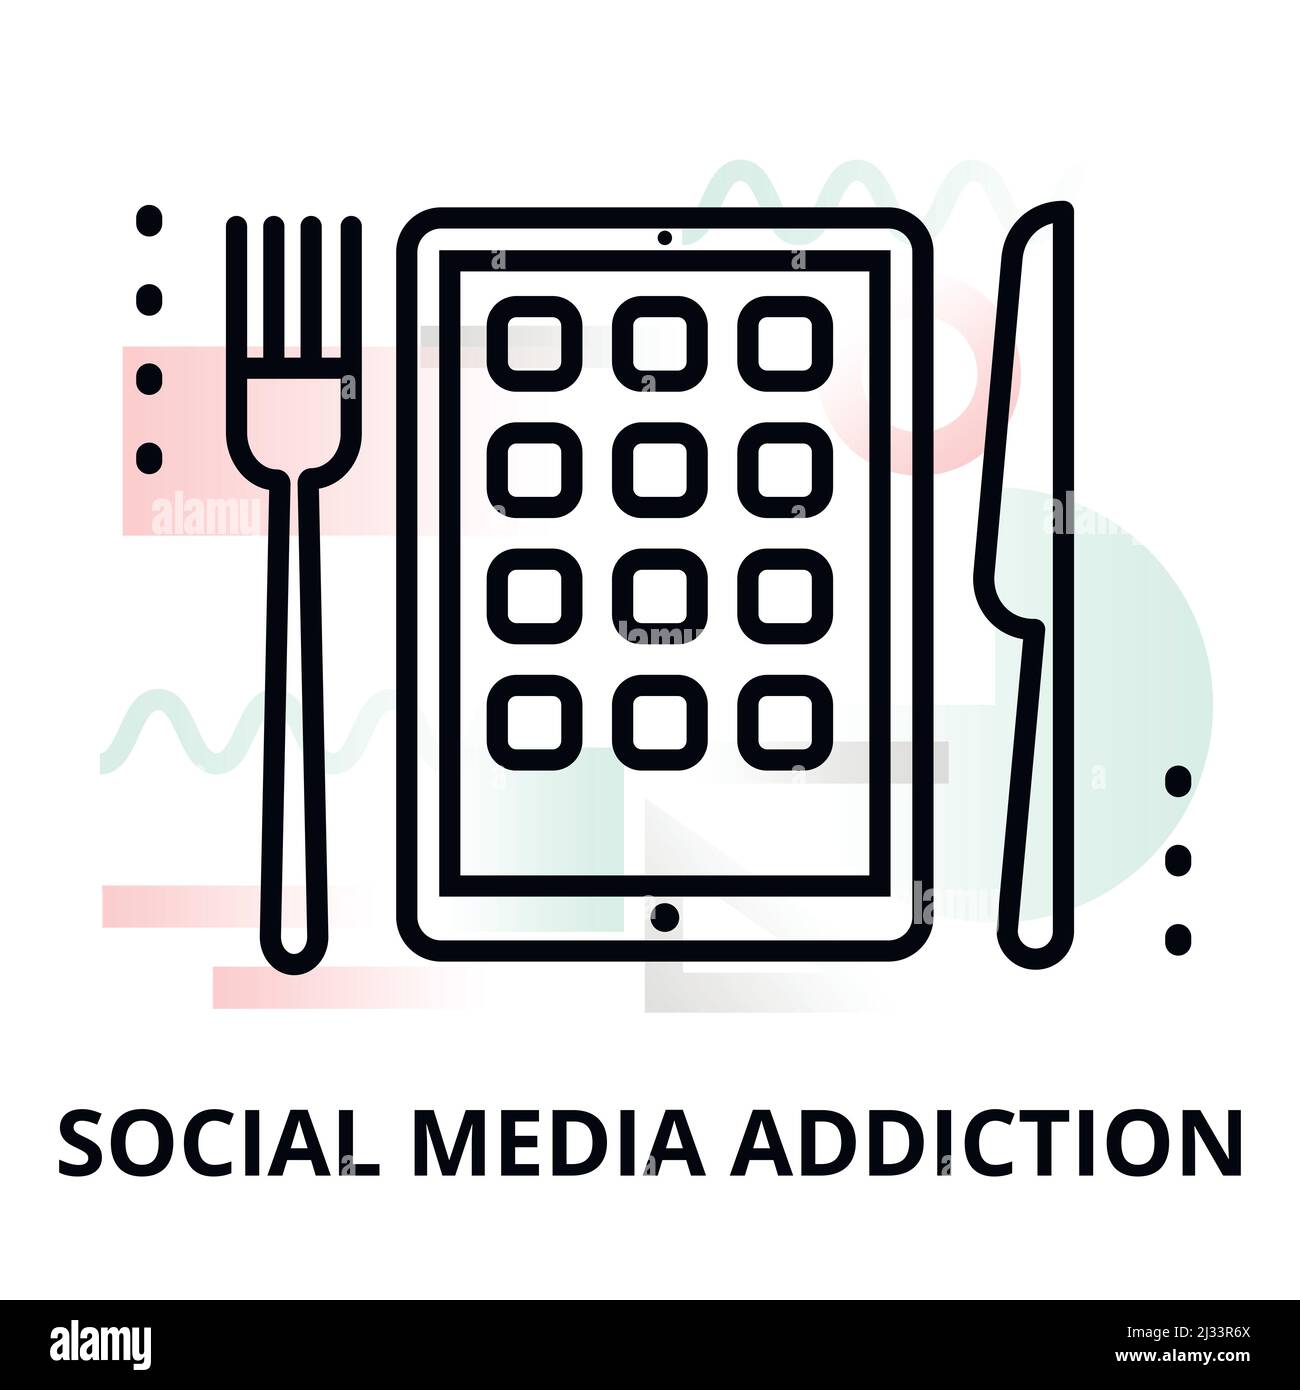 Modern flat thin line design vector illustration, concept of social media addiction on abstract background, for graphic and web design Stock Vector